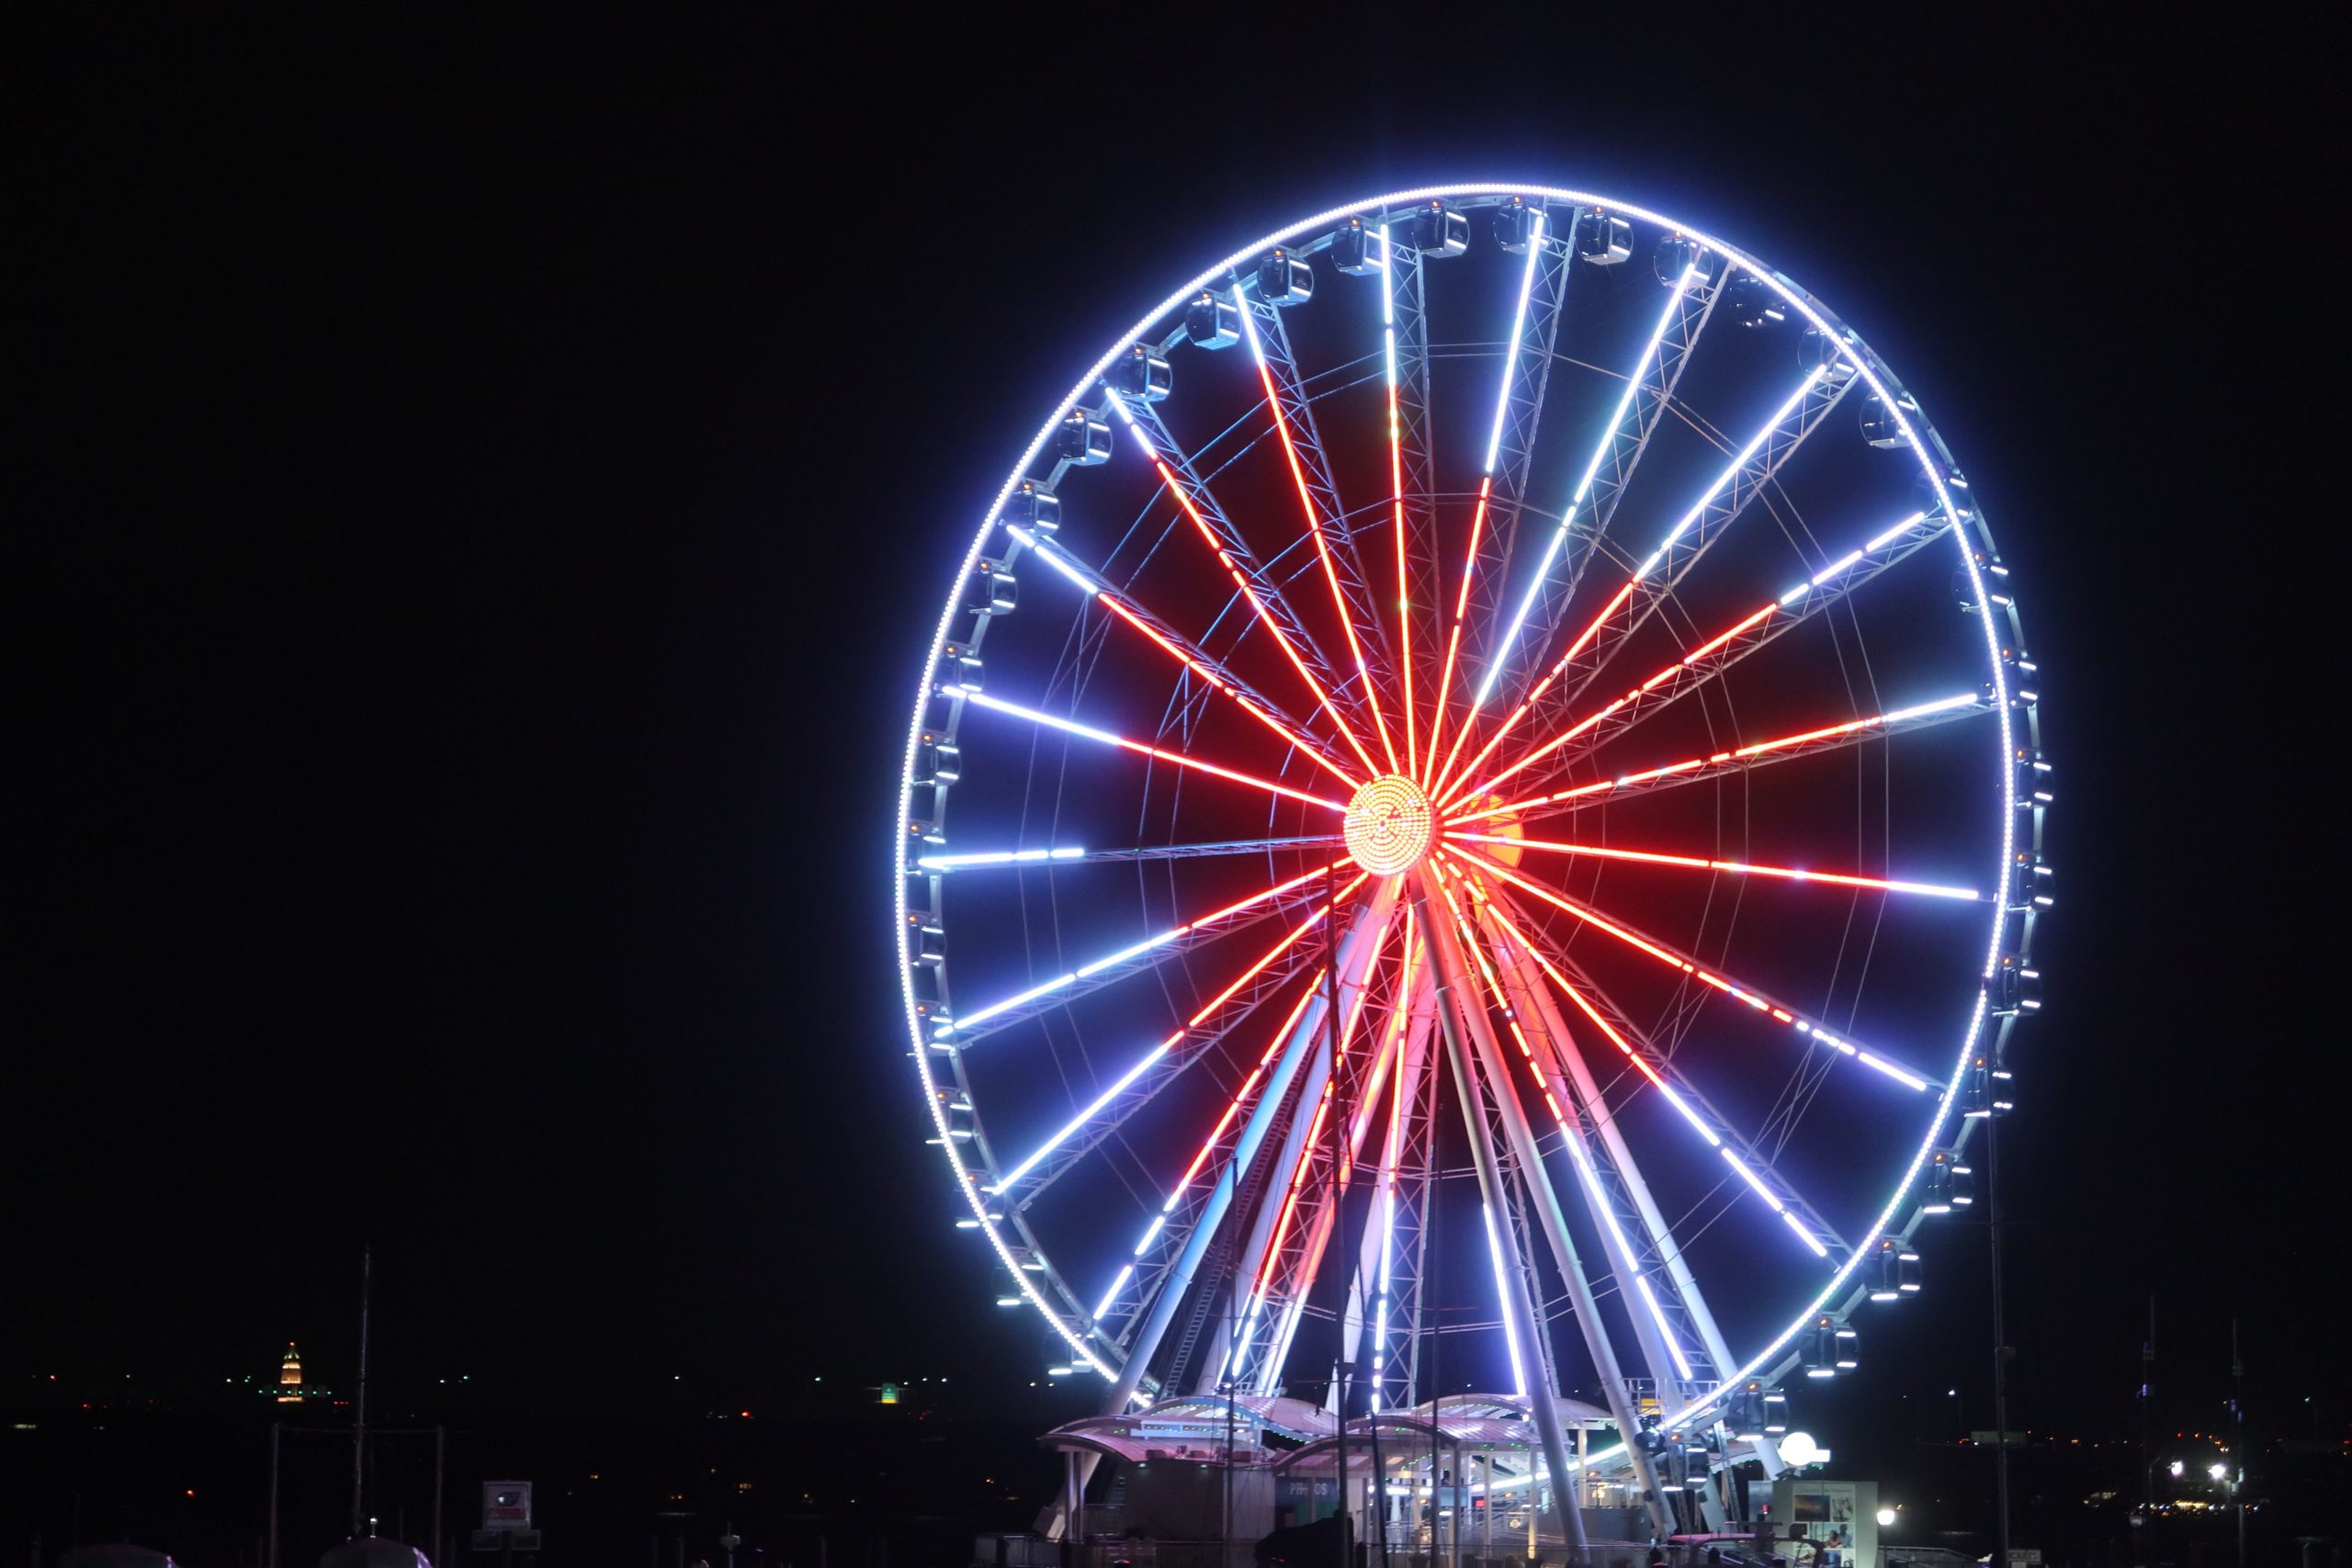 Love is in the Air at National Harbor’s Capital Wheel on Saturdays and Sundays